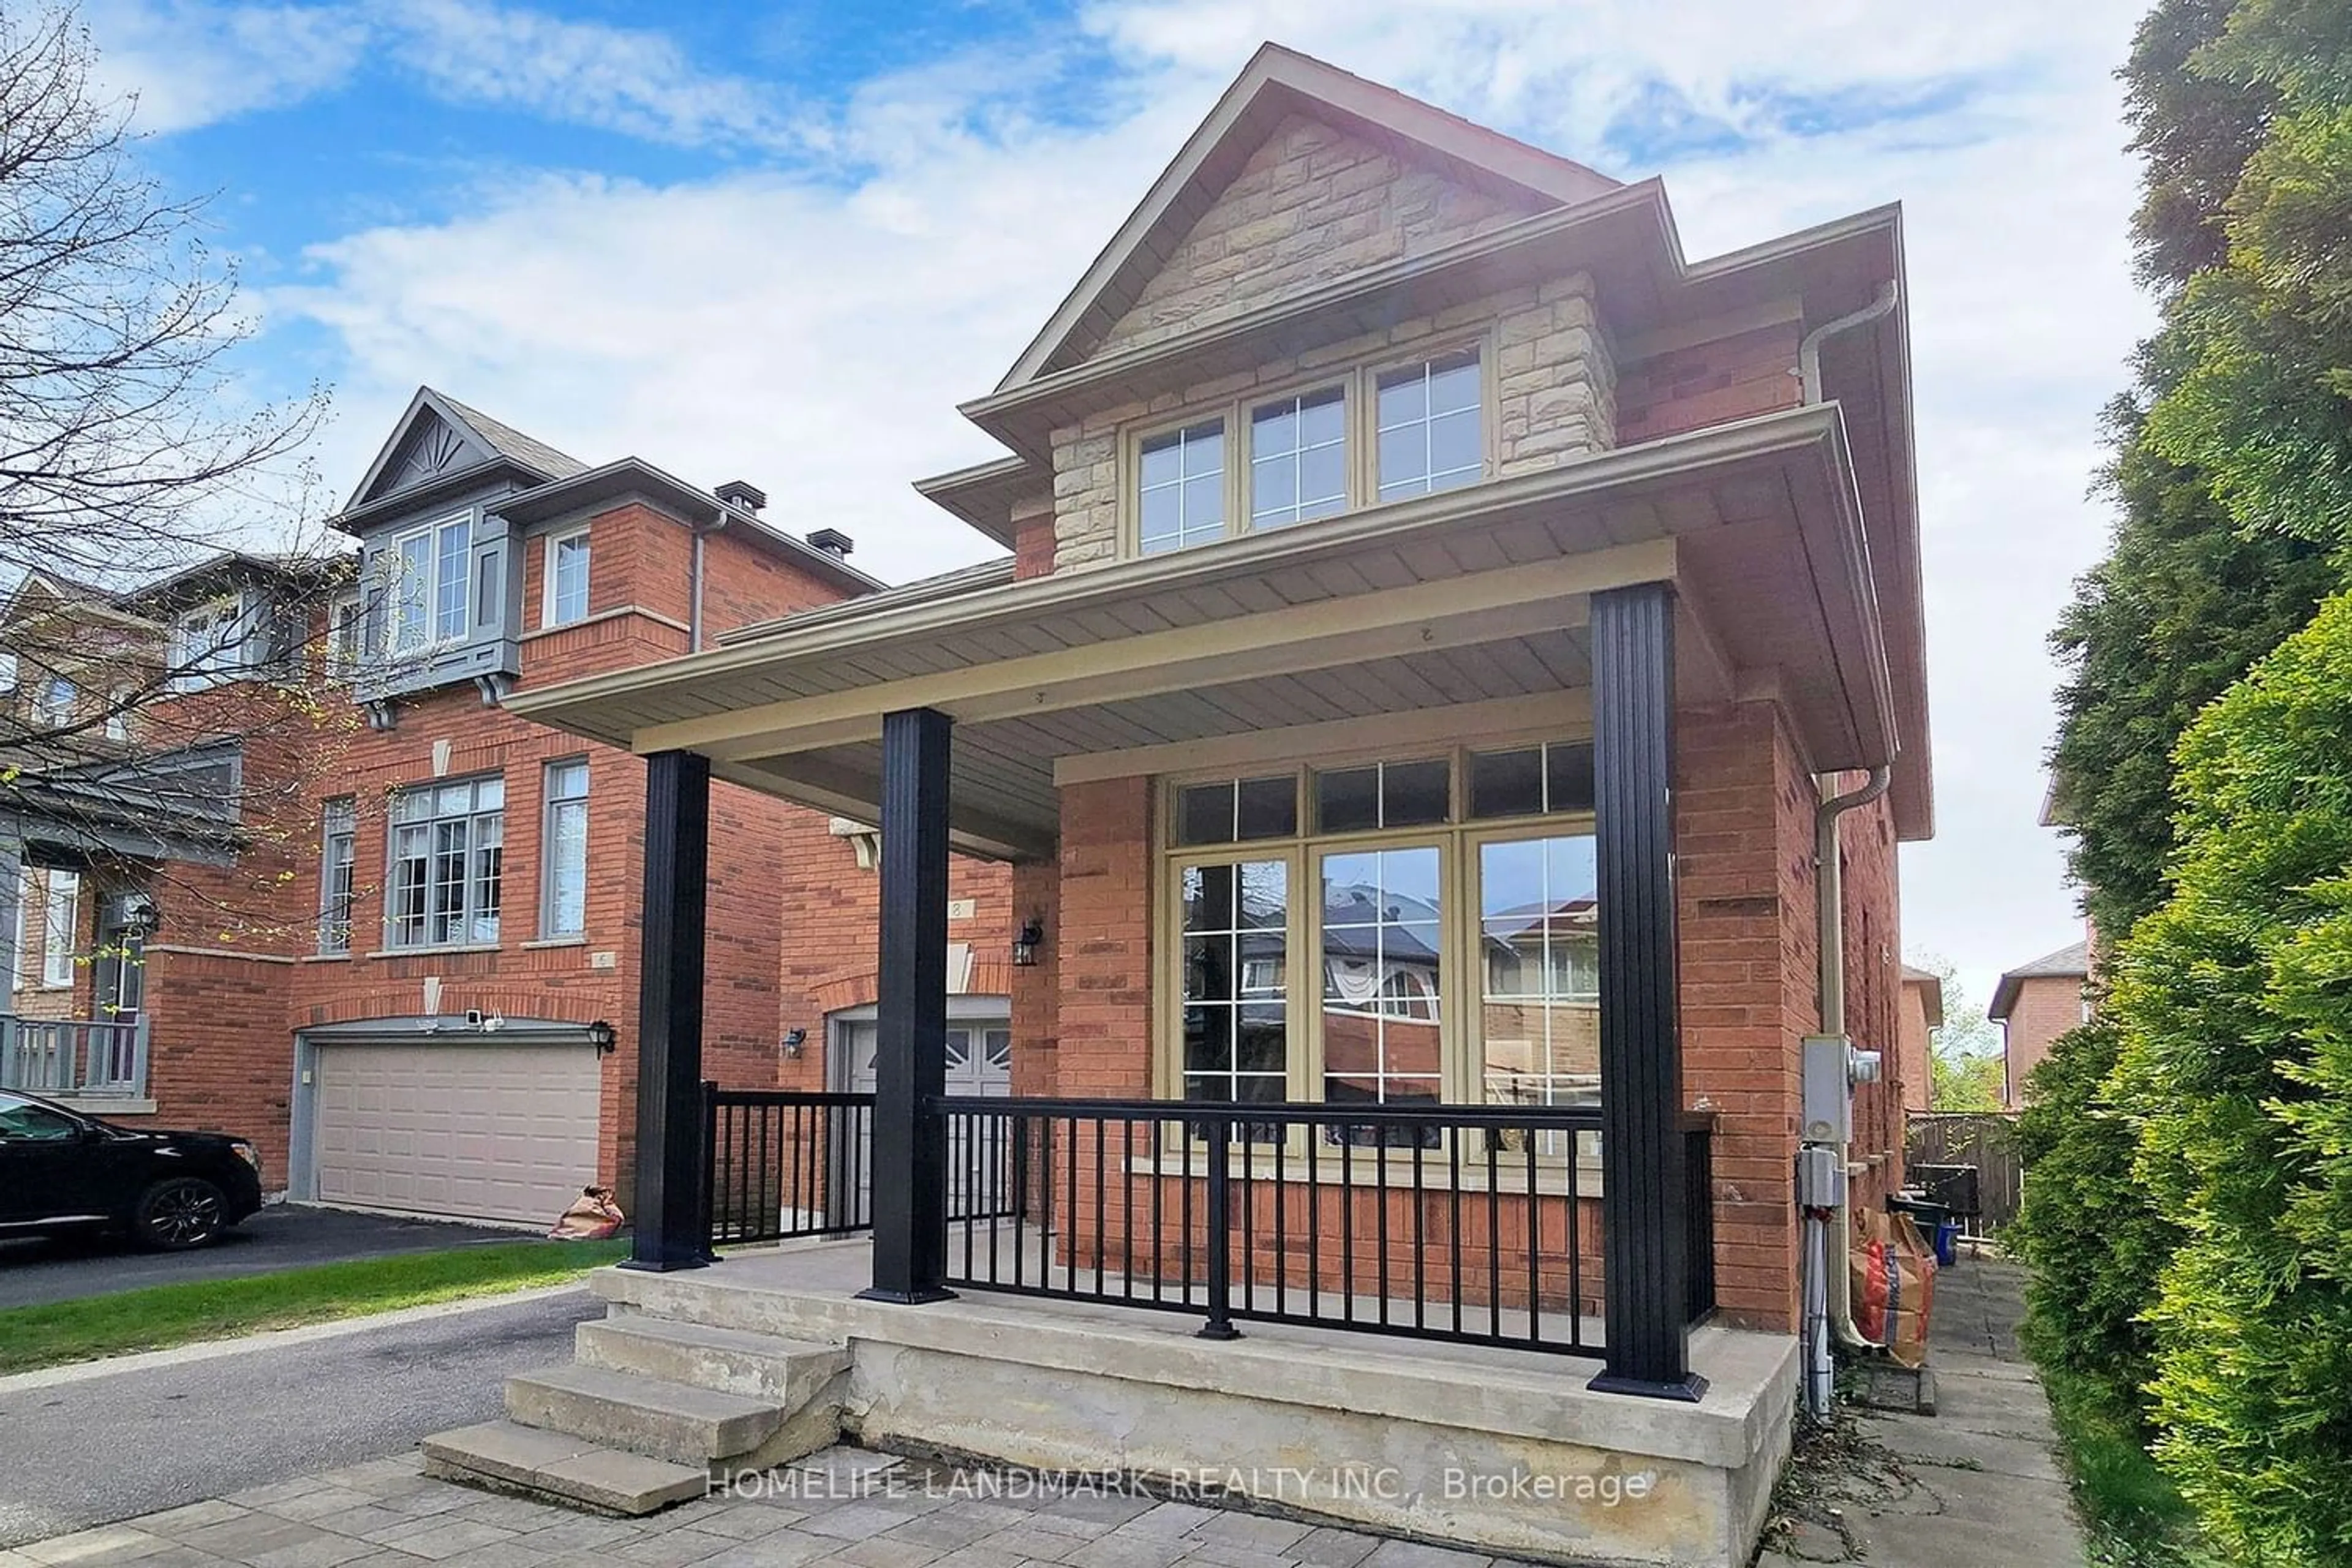 Home with brick exterior material for 8 Fairlawn Ave, Markham Ontario L6C 2E7